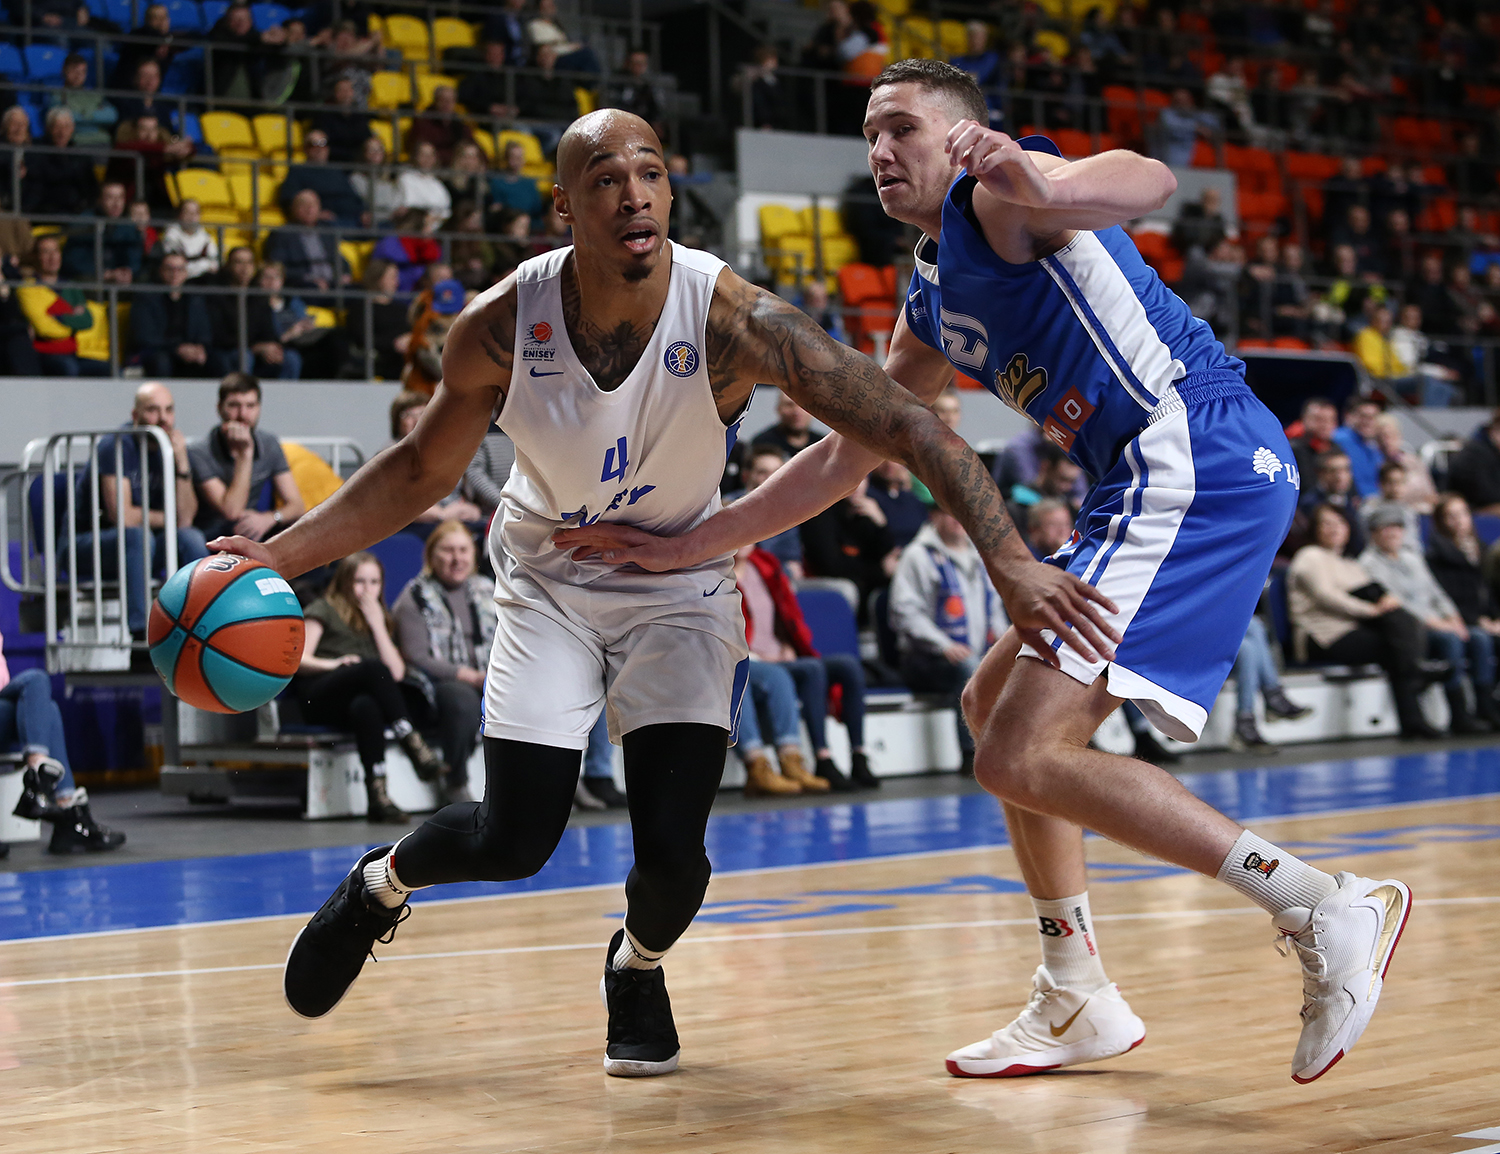 Enisey’s first win over Kalev in three years